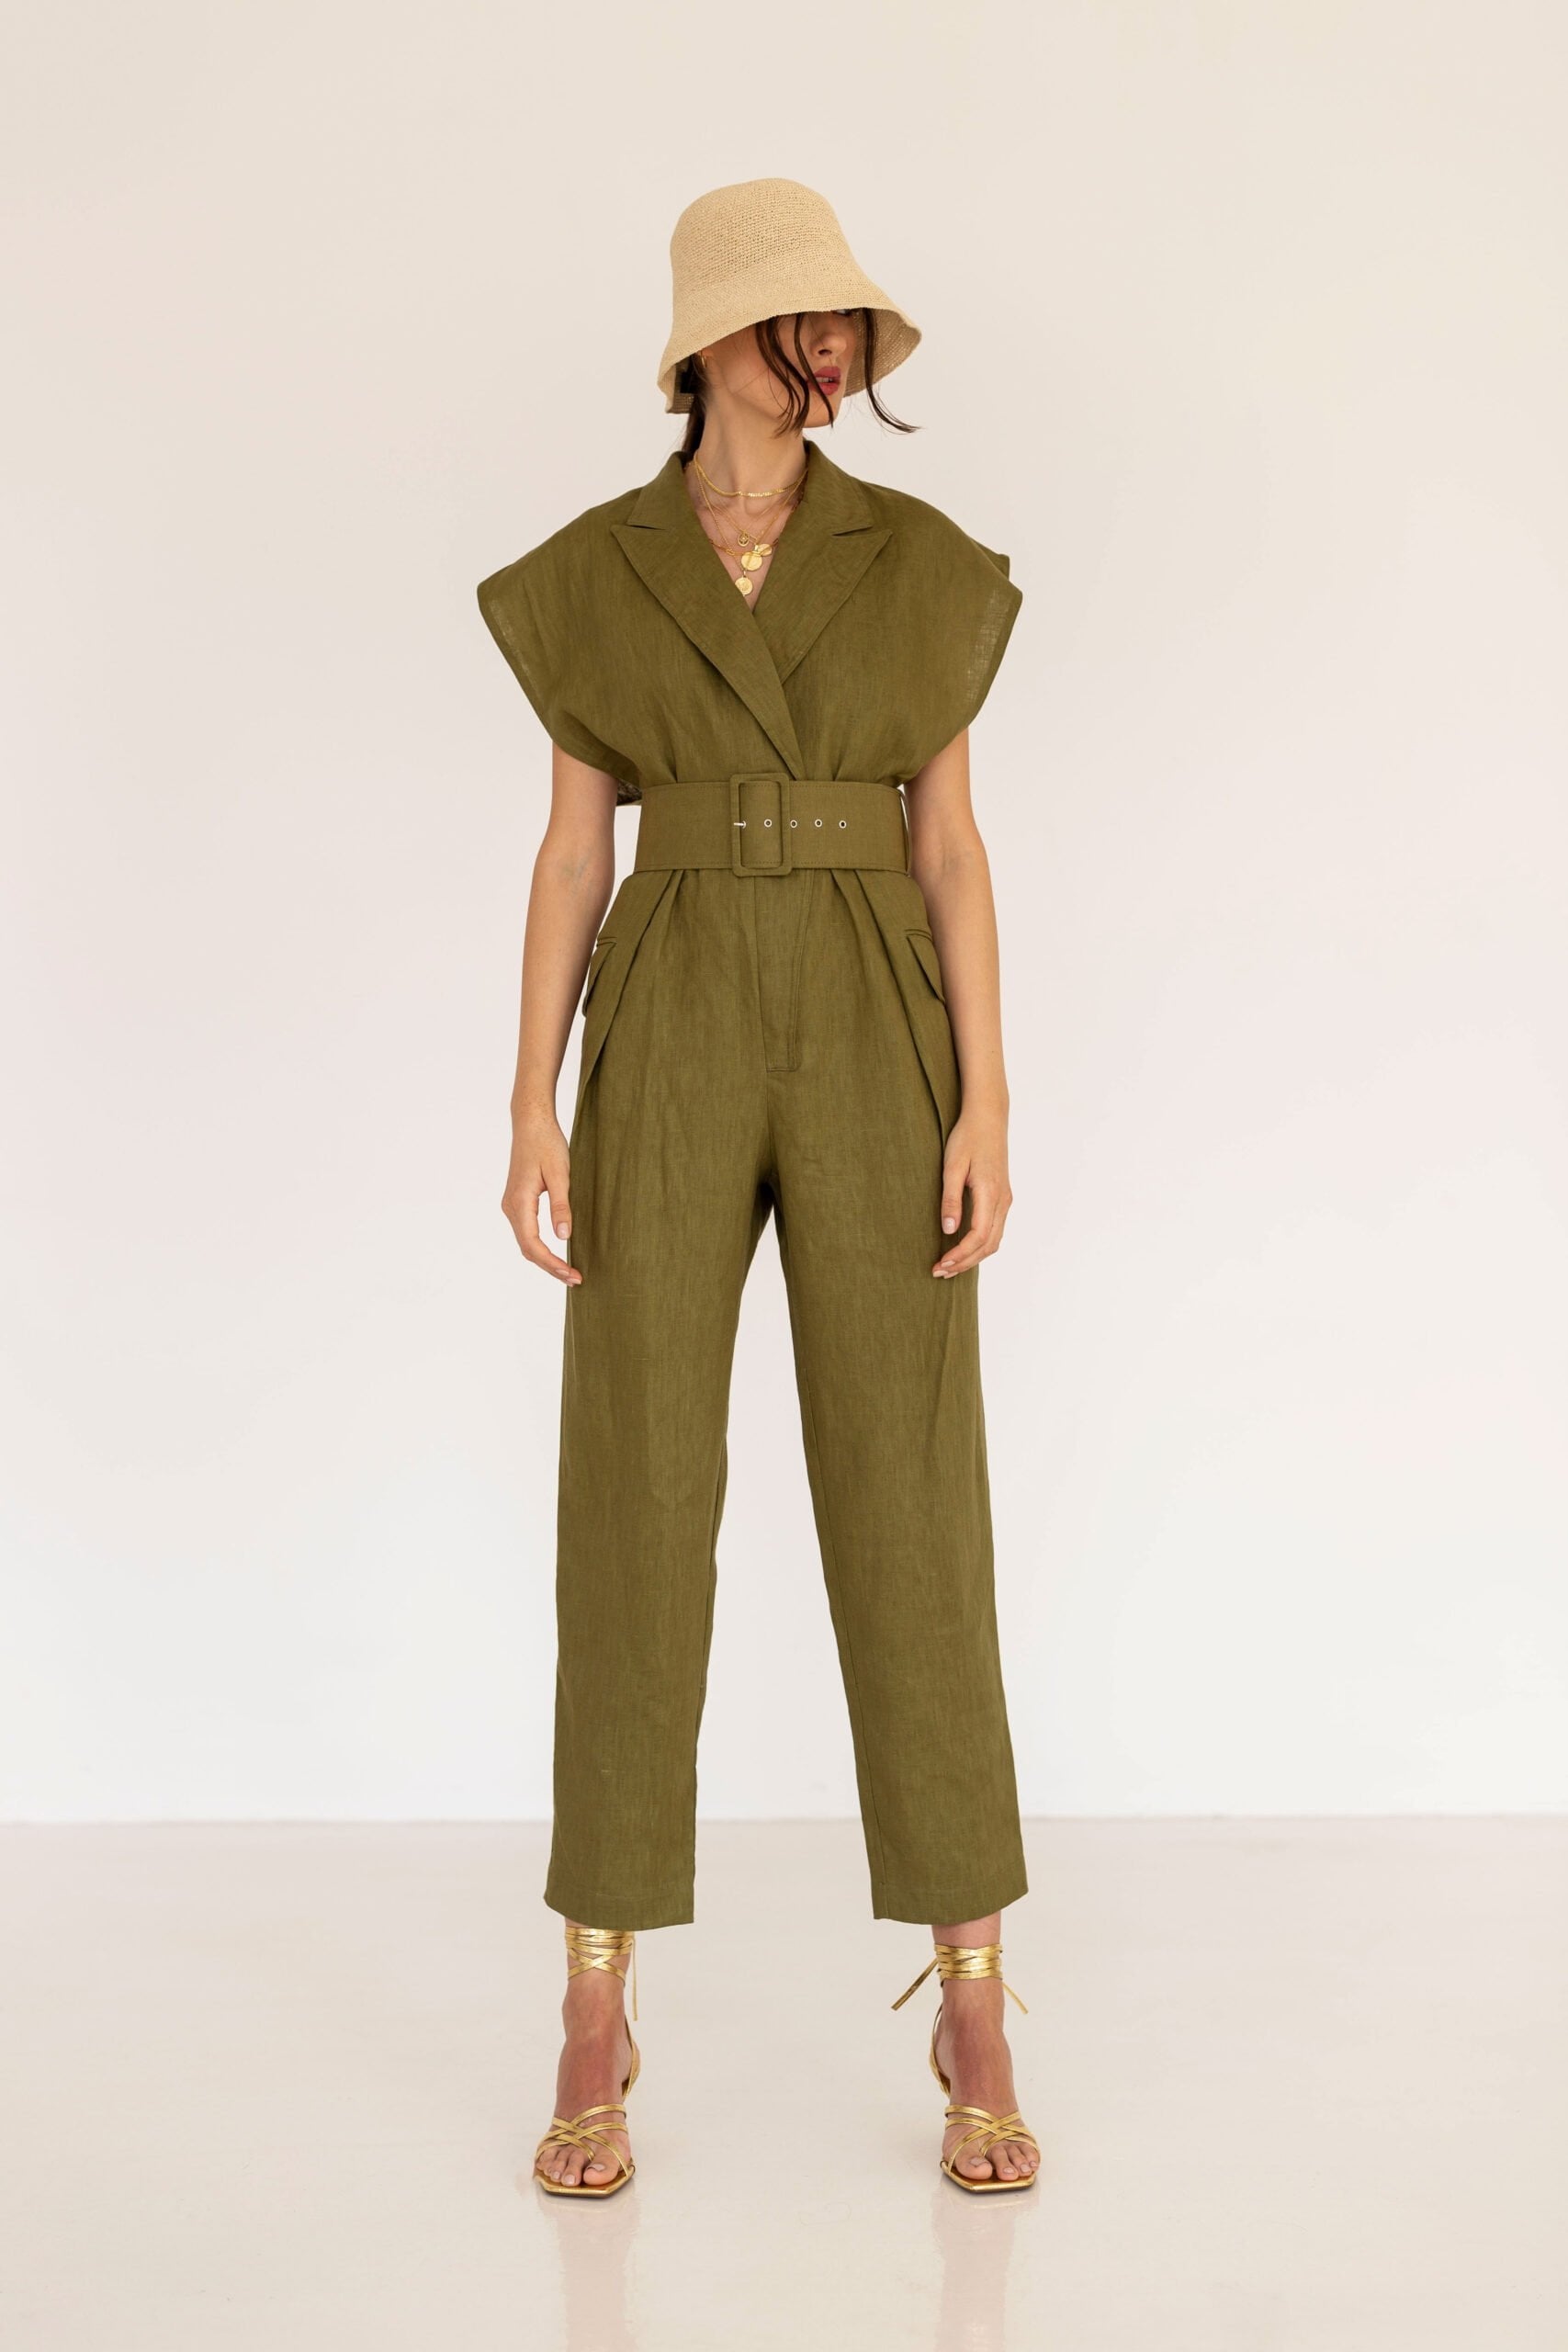 The Army Jumpsuit